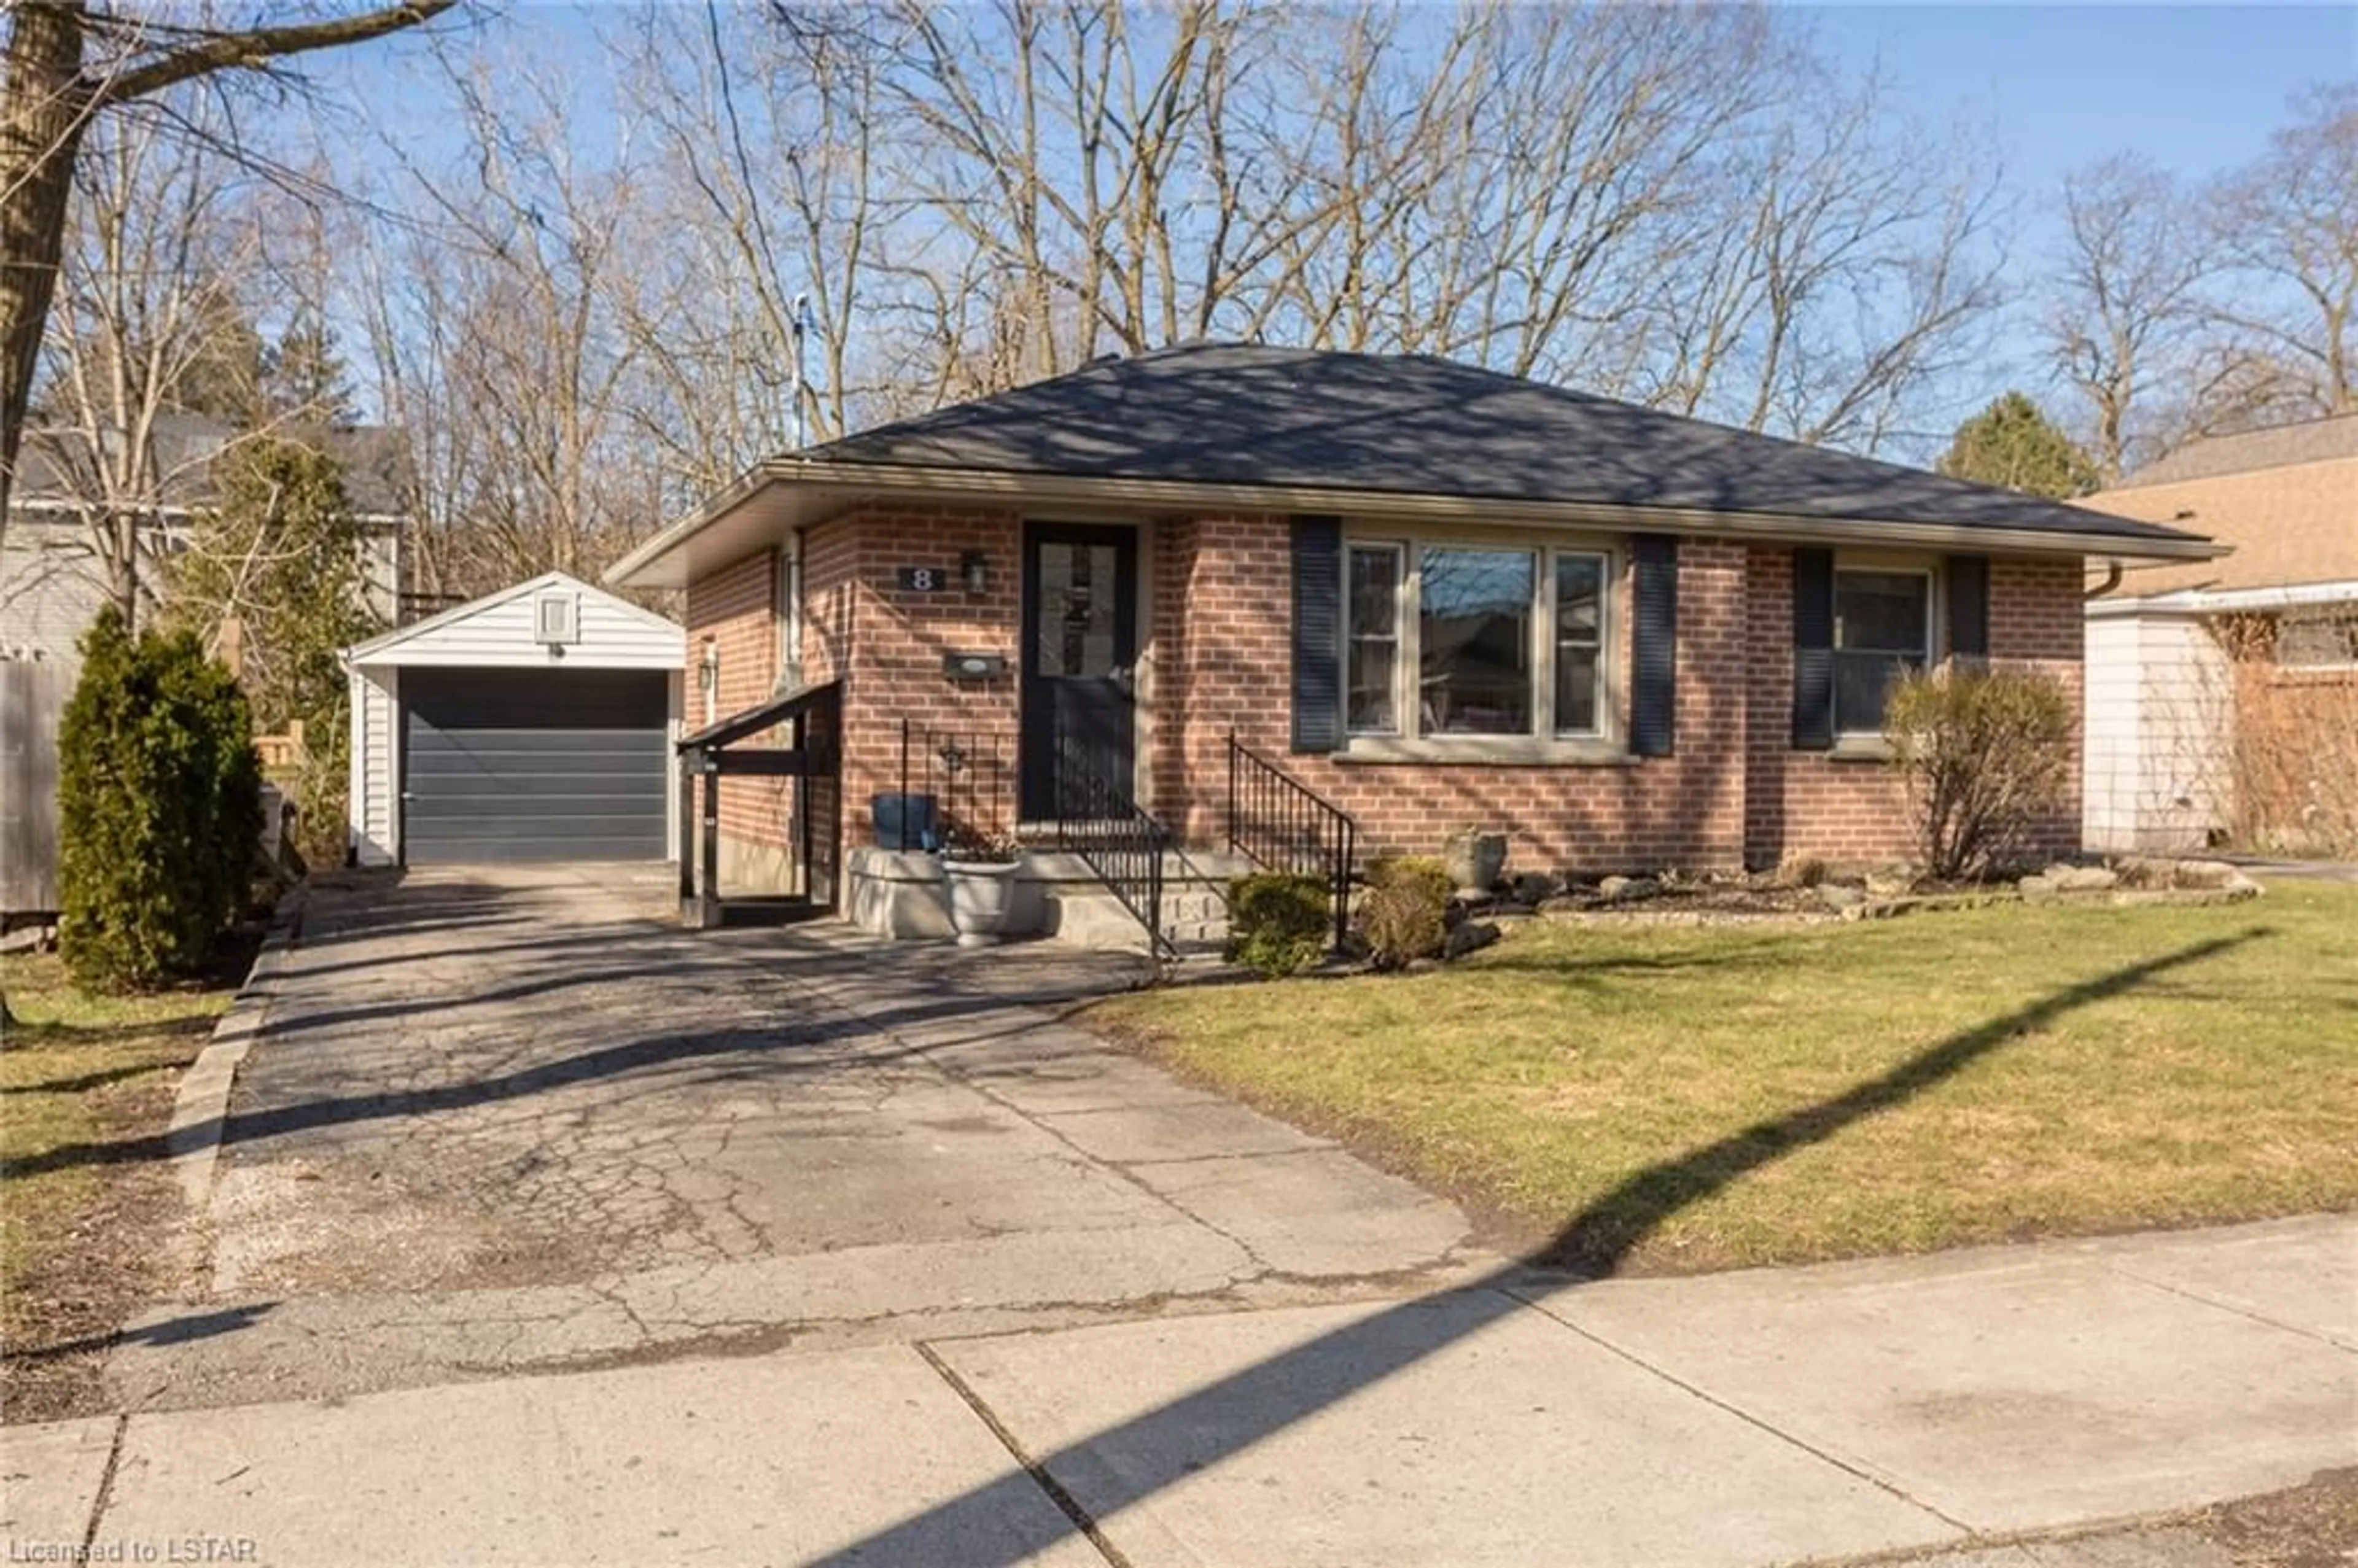 Home with brick exterior material for 8 Gower St, London Ontario N6H 2E6